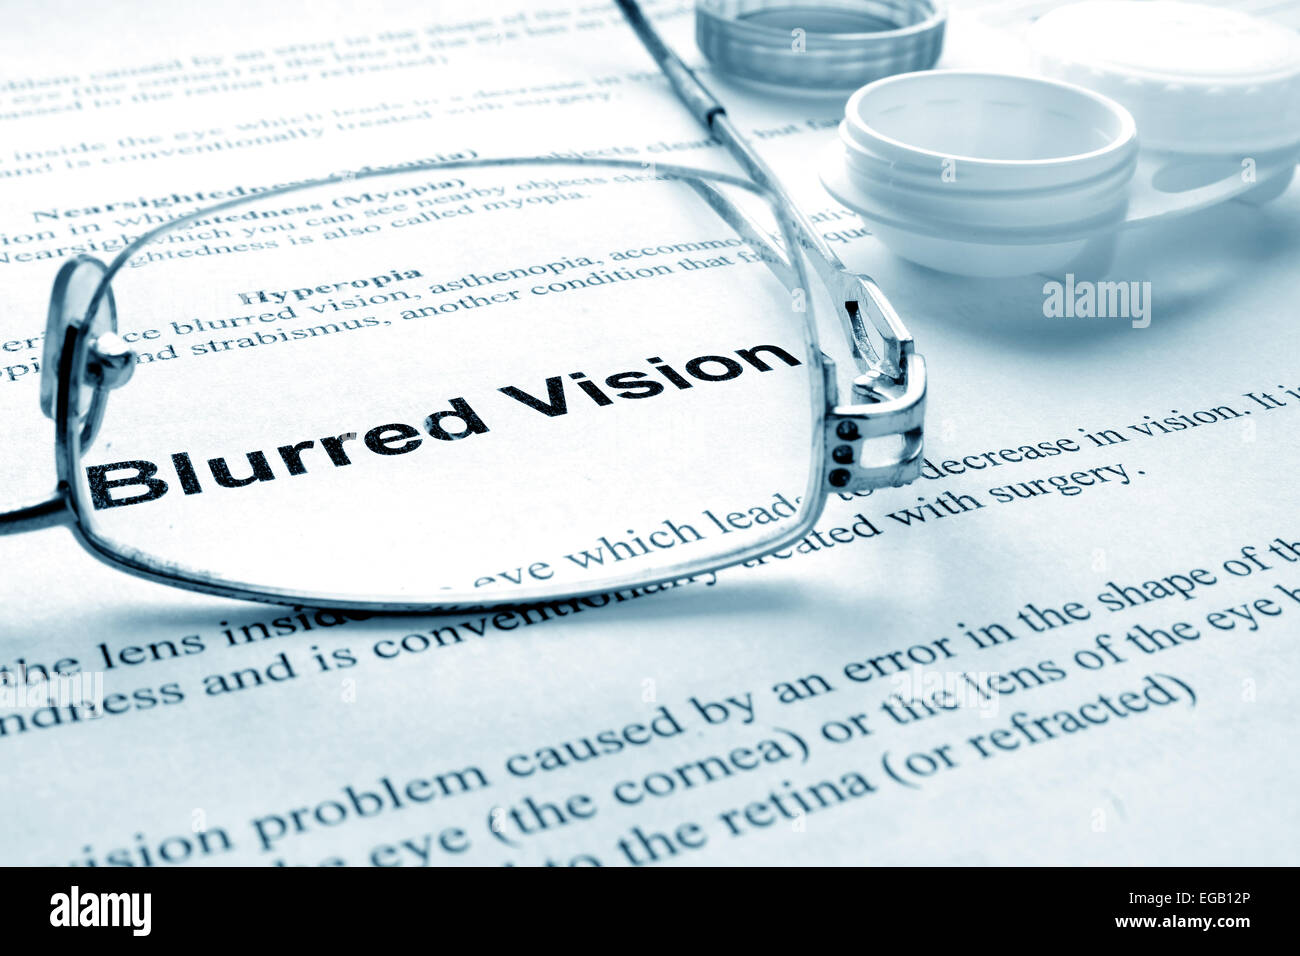 Paper with words  blurred vision, glasses and container for lenses. Eye disorders. Selective focus. Stock Photo